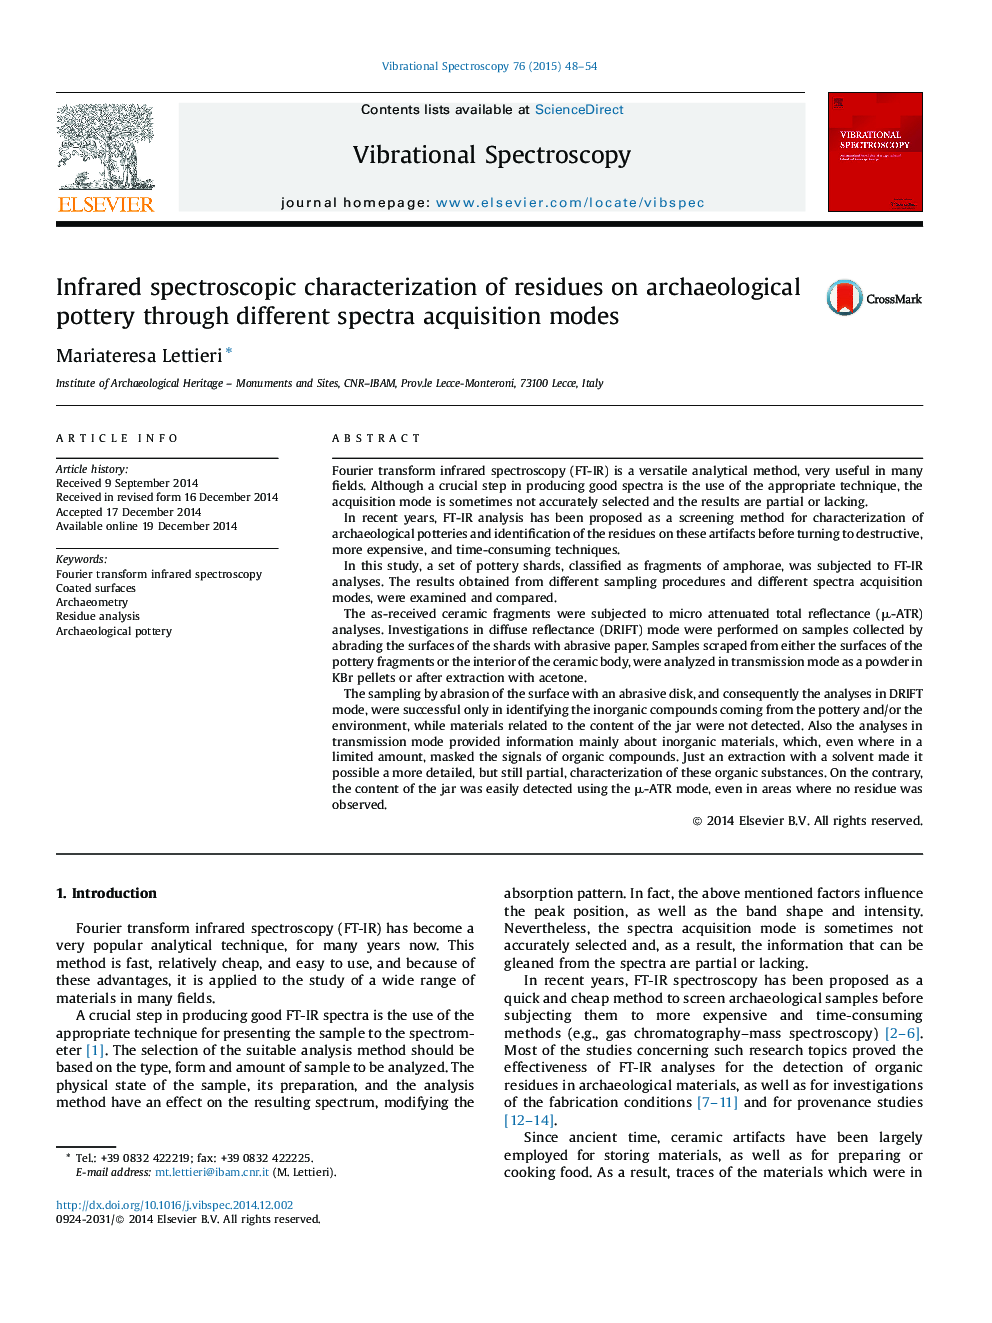 Infrared spectroscopic characterization of residues on archaeological pottery through different spectra acquisition modes